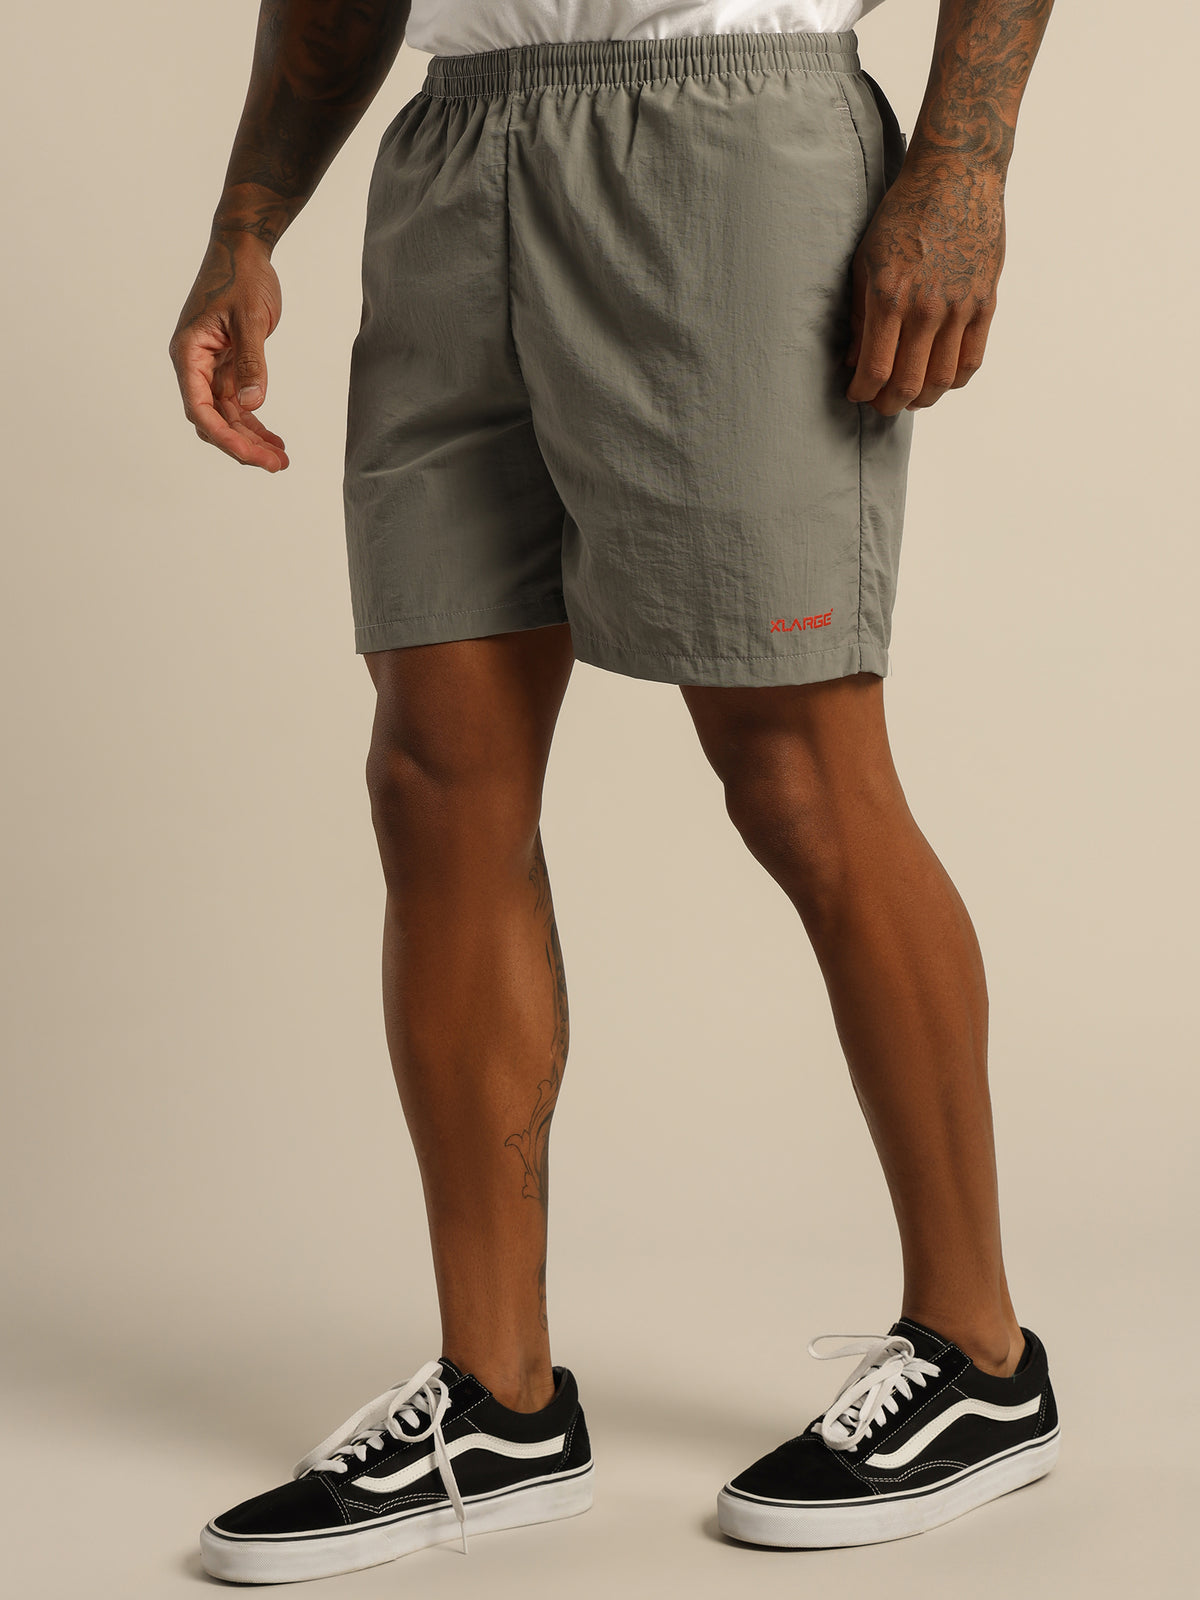 Mountain Shorts 2.0 in Charcoal